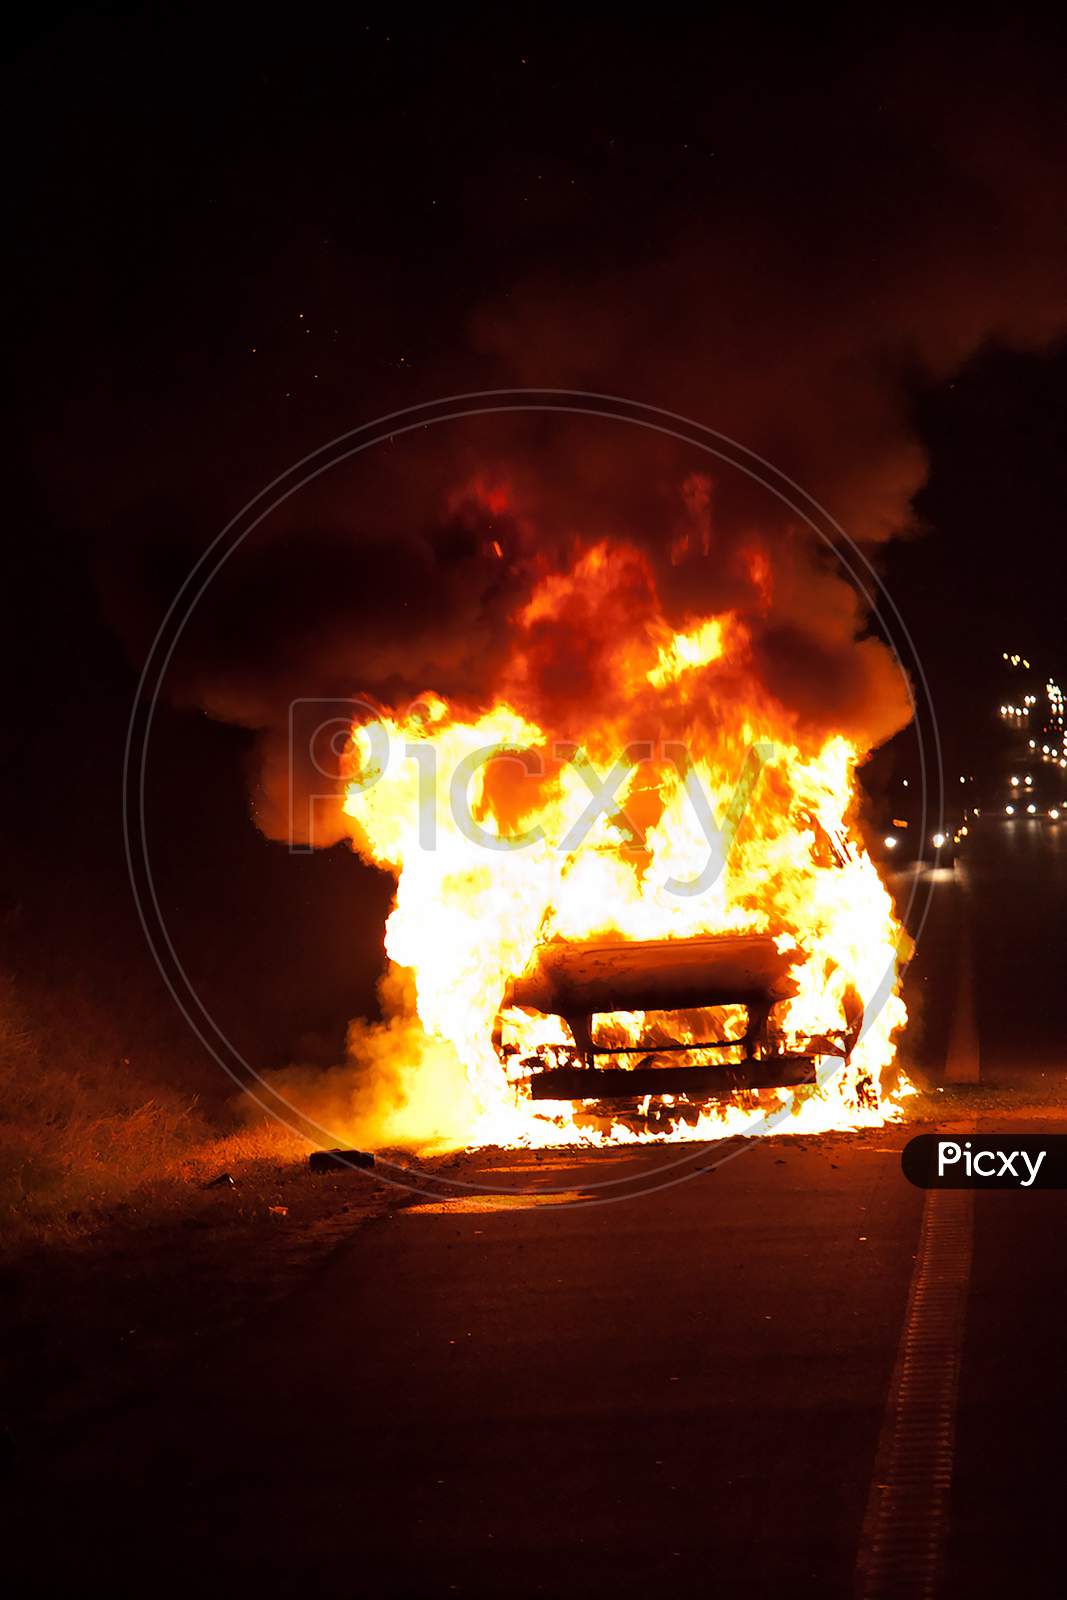 Car On Heavy Fire At Night